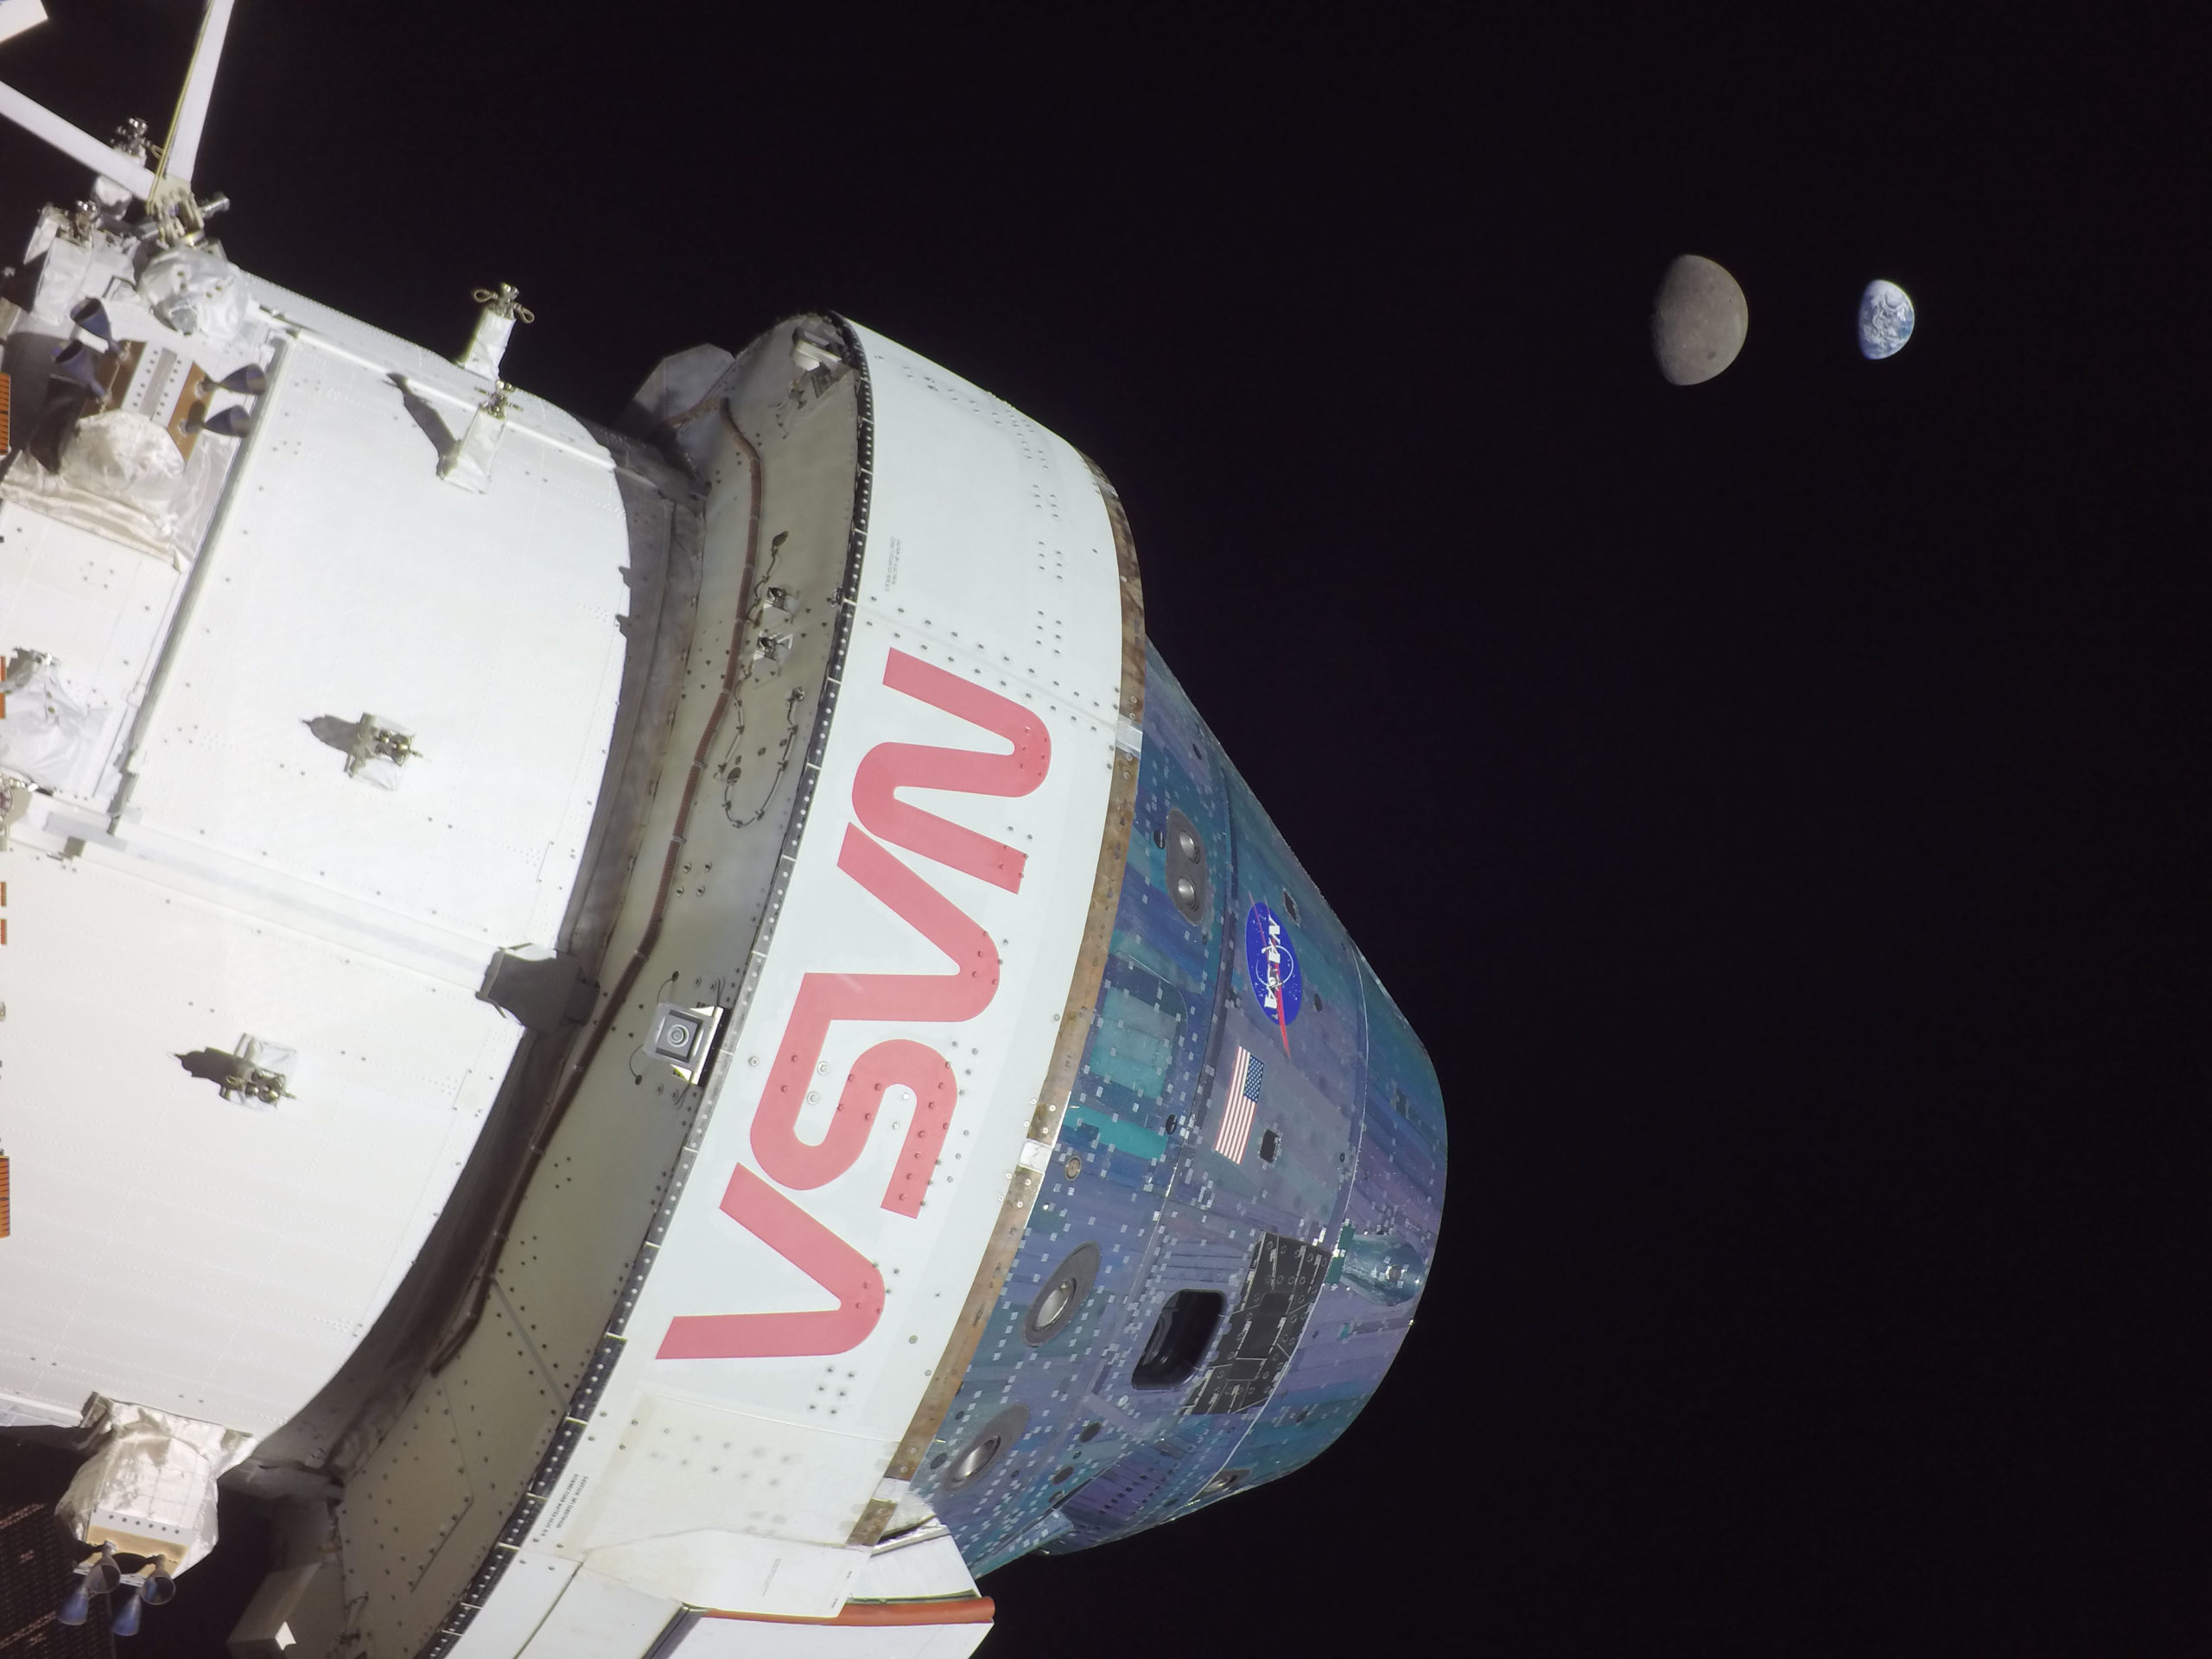 Orion Reaches Farthest Distance and Halfway Mark on Artemis 1 Mission Snaping Stunning Selfie with Earth and Moon